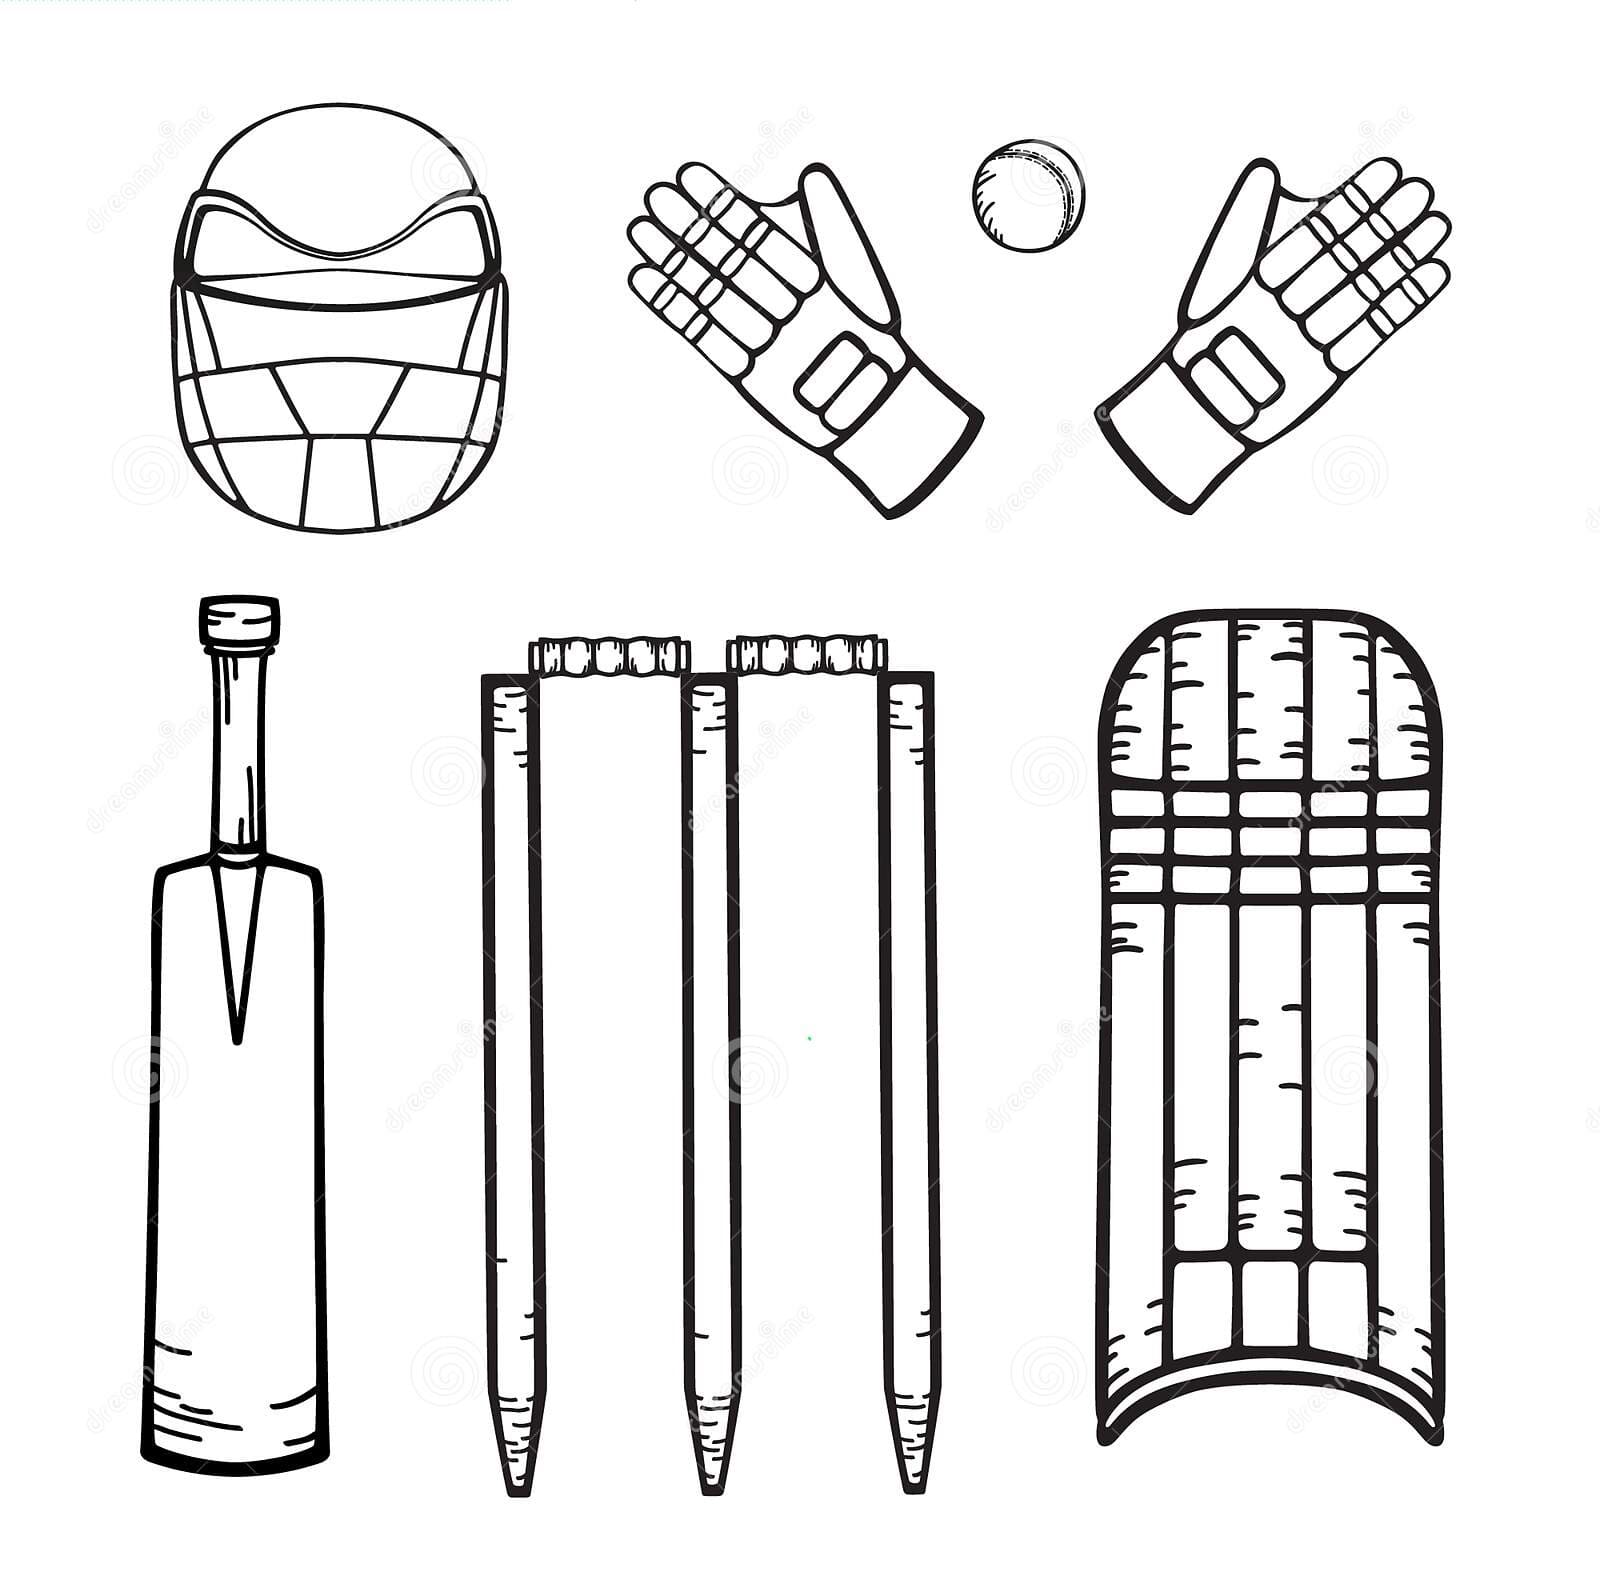 Cricket Equipment Image Coloring Page